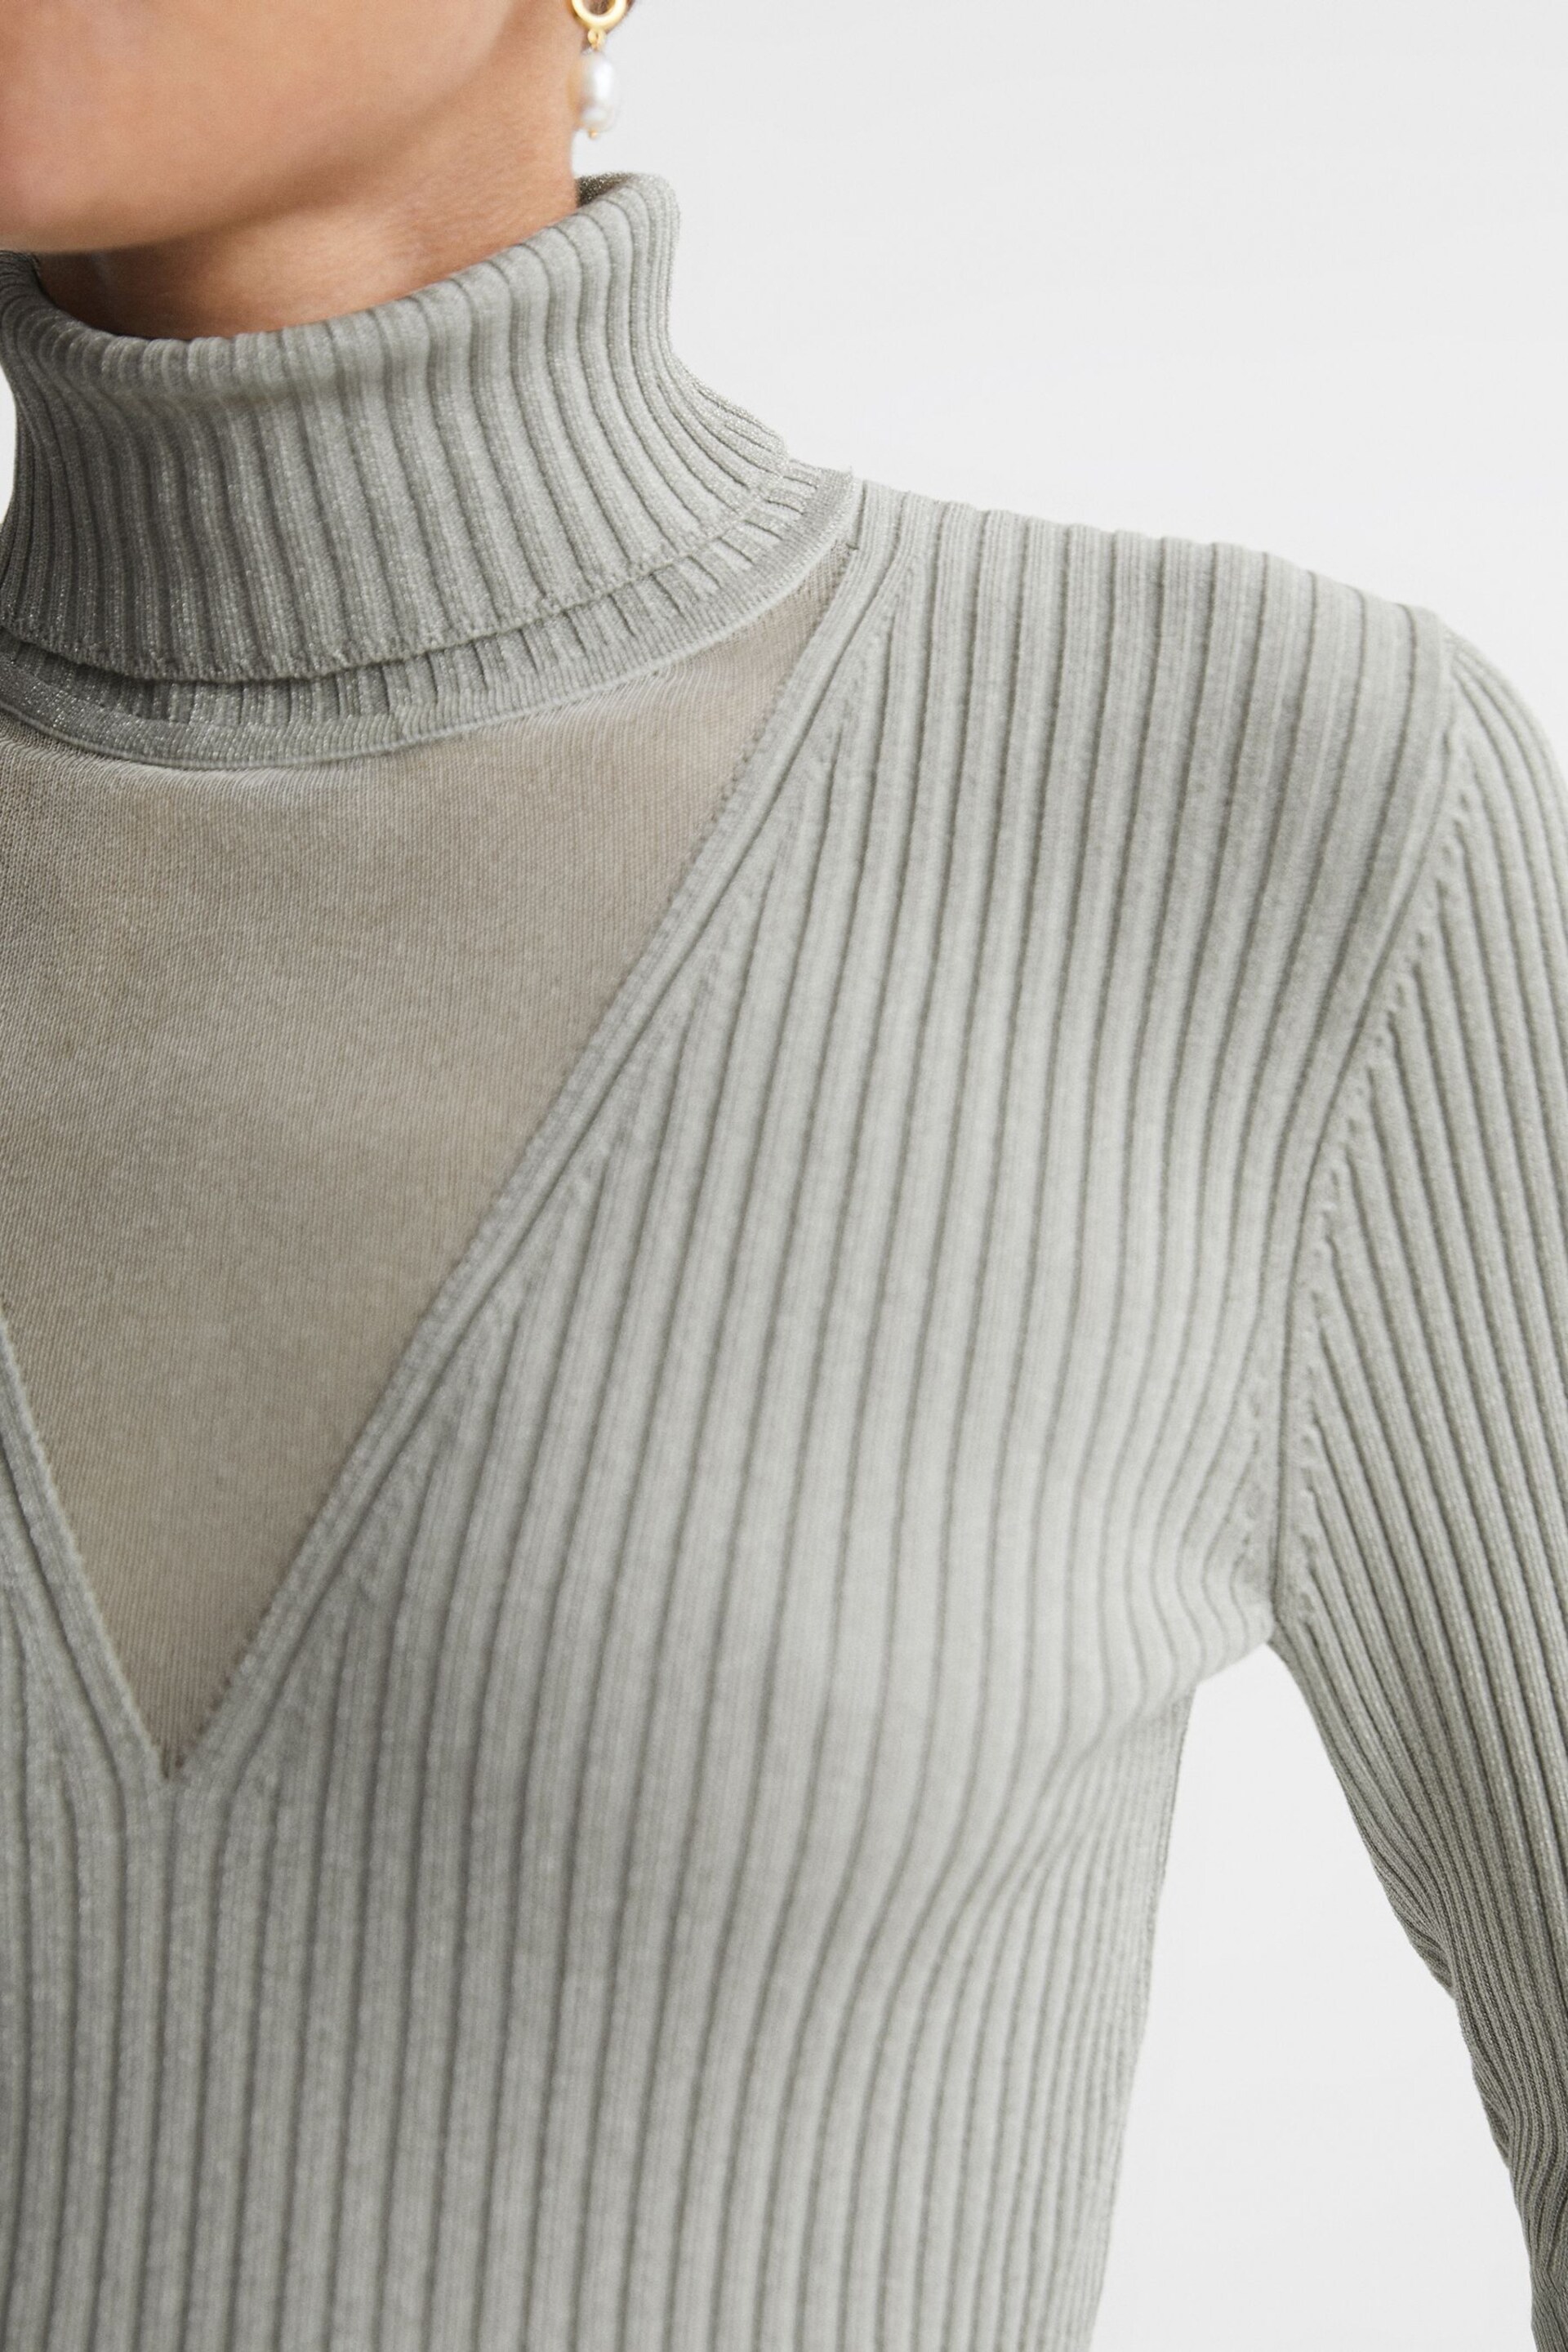 Reiss Silver Tanya Metallic Ribbed Mesh Panel Funnel Neck Top - Image 4 of 6